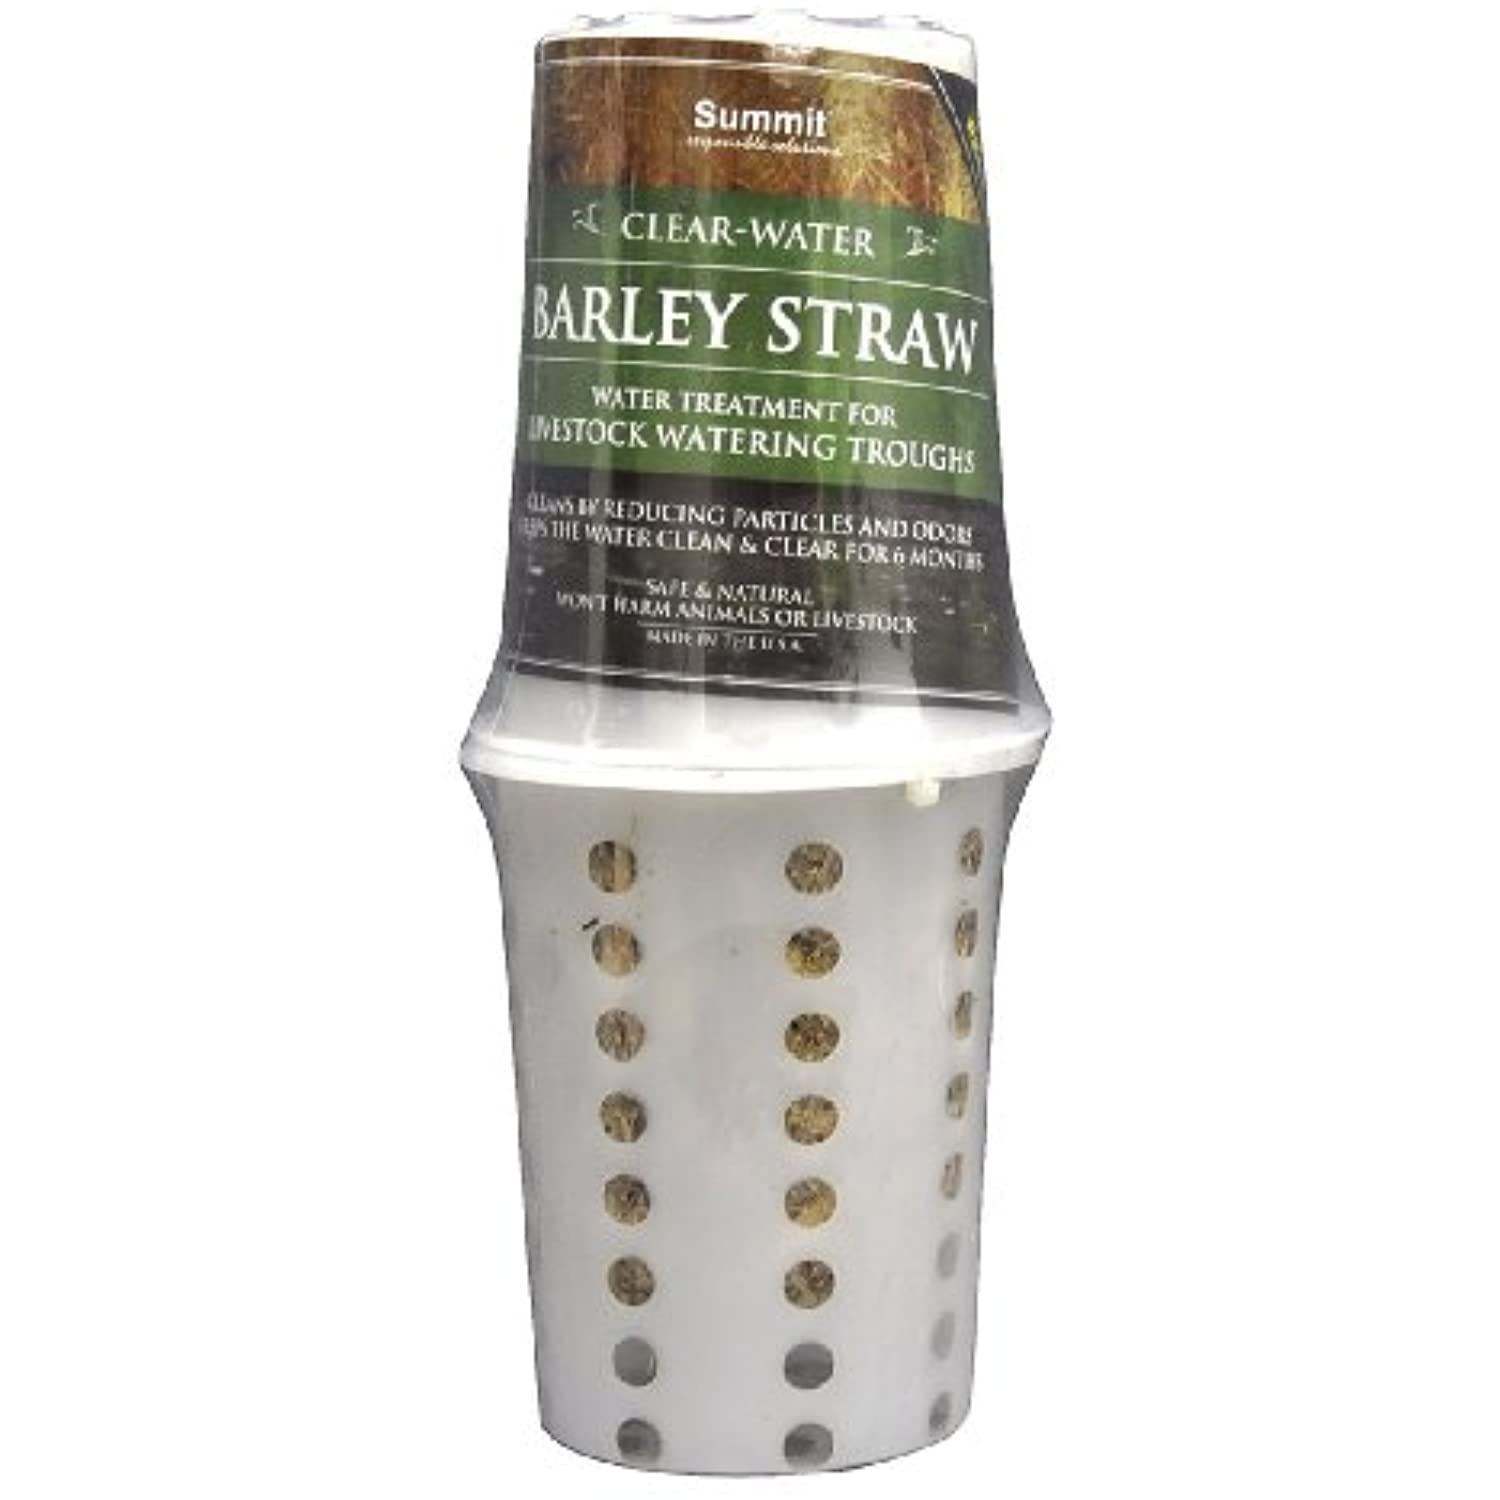 Summit 131 Clear-Water Barley Straw for Livestock Watering Troughs, Treats up to 1000-Gallons